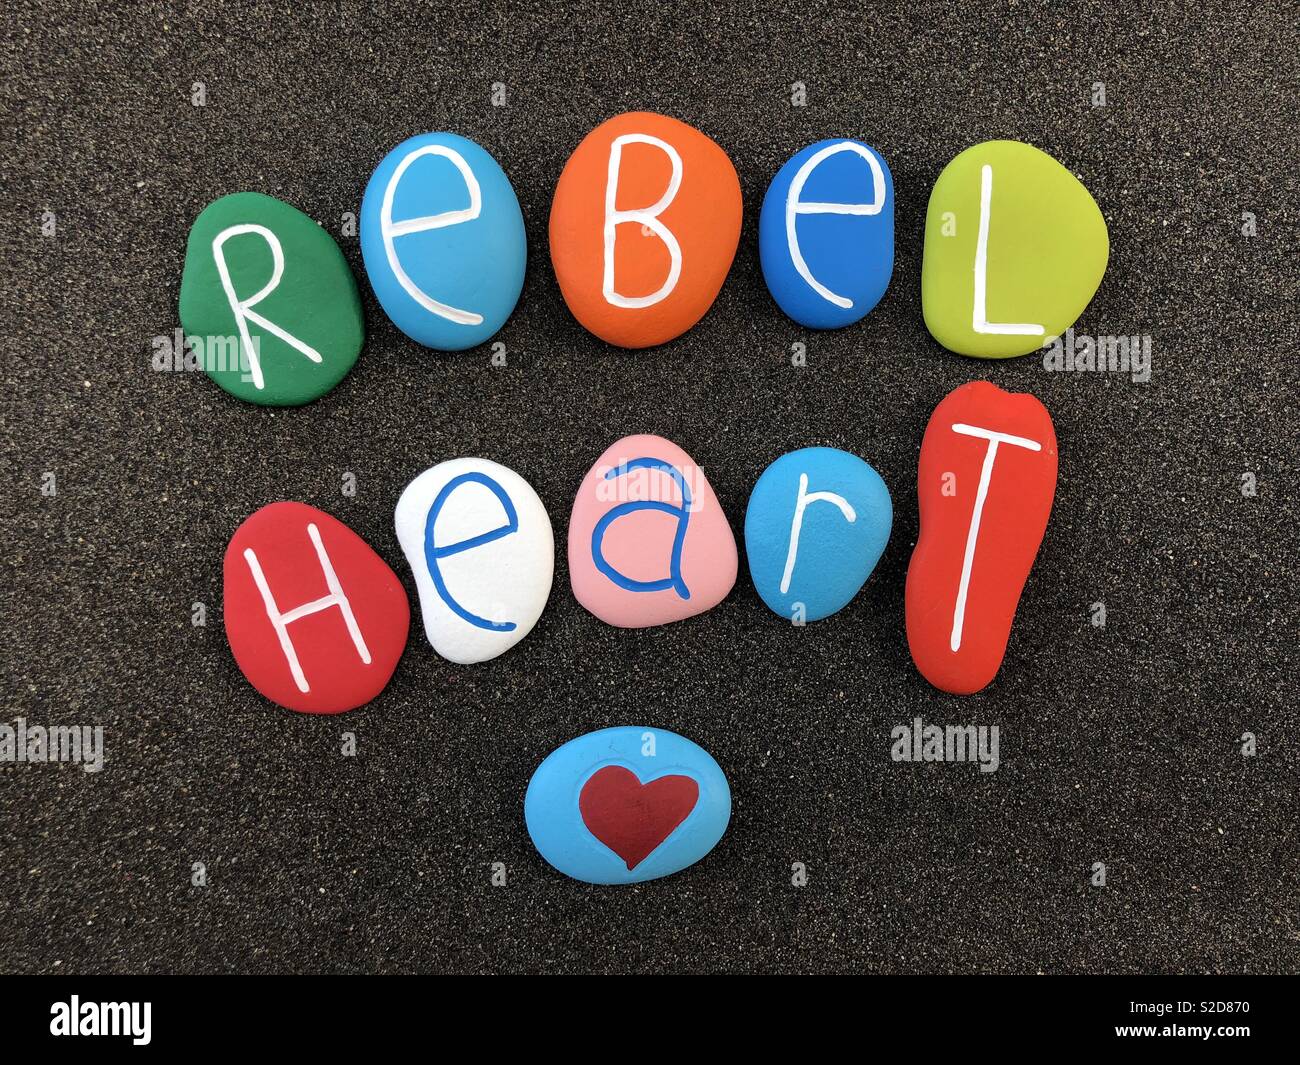 Rebel heart text with colored stones over black volcanic sand Stock Photo